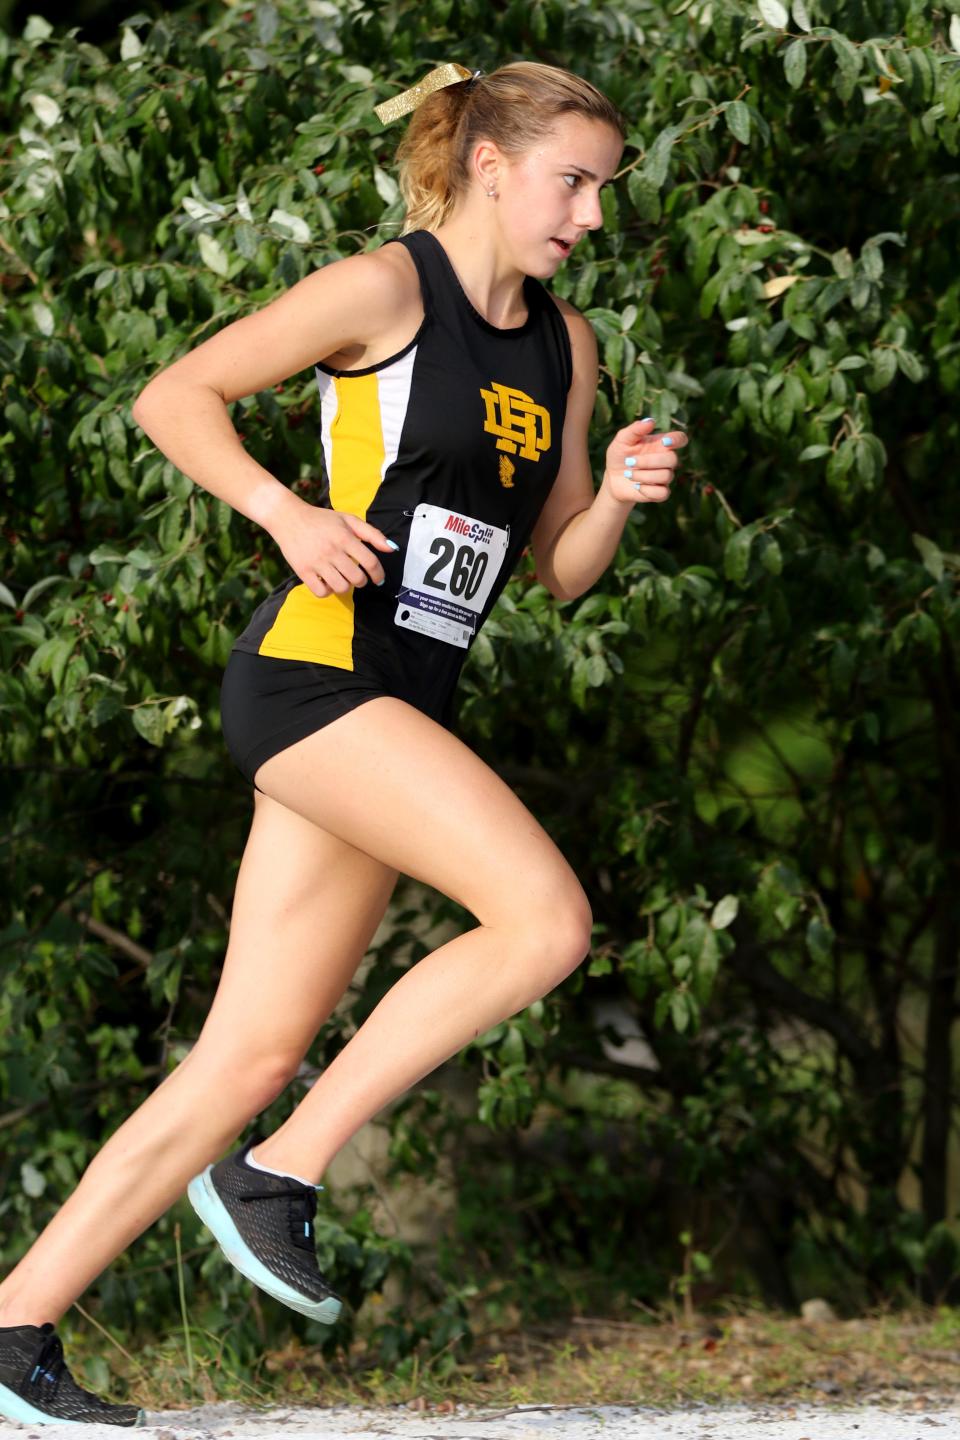 Christina Allen, of River Dell, is shown on her way to a first place finish with a time of 20:03 at the Big North - Patriot Batch Meet, at Darlington County Park, in Mahwah.  Monday September 27, 2021